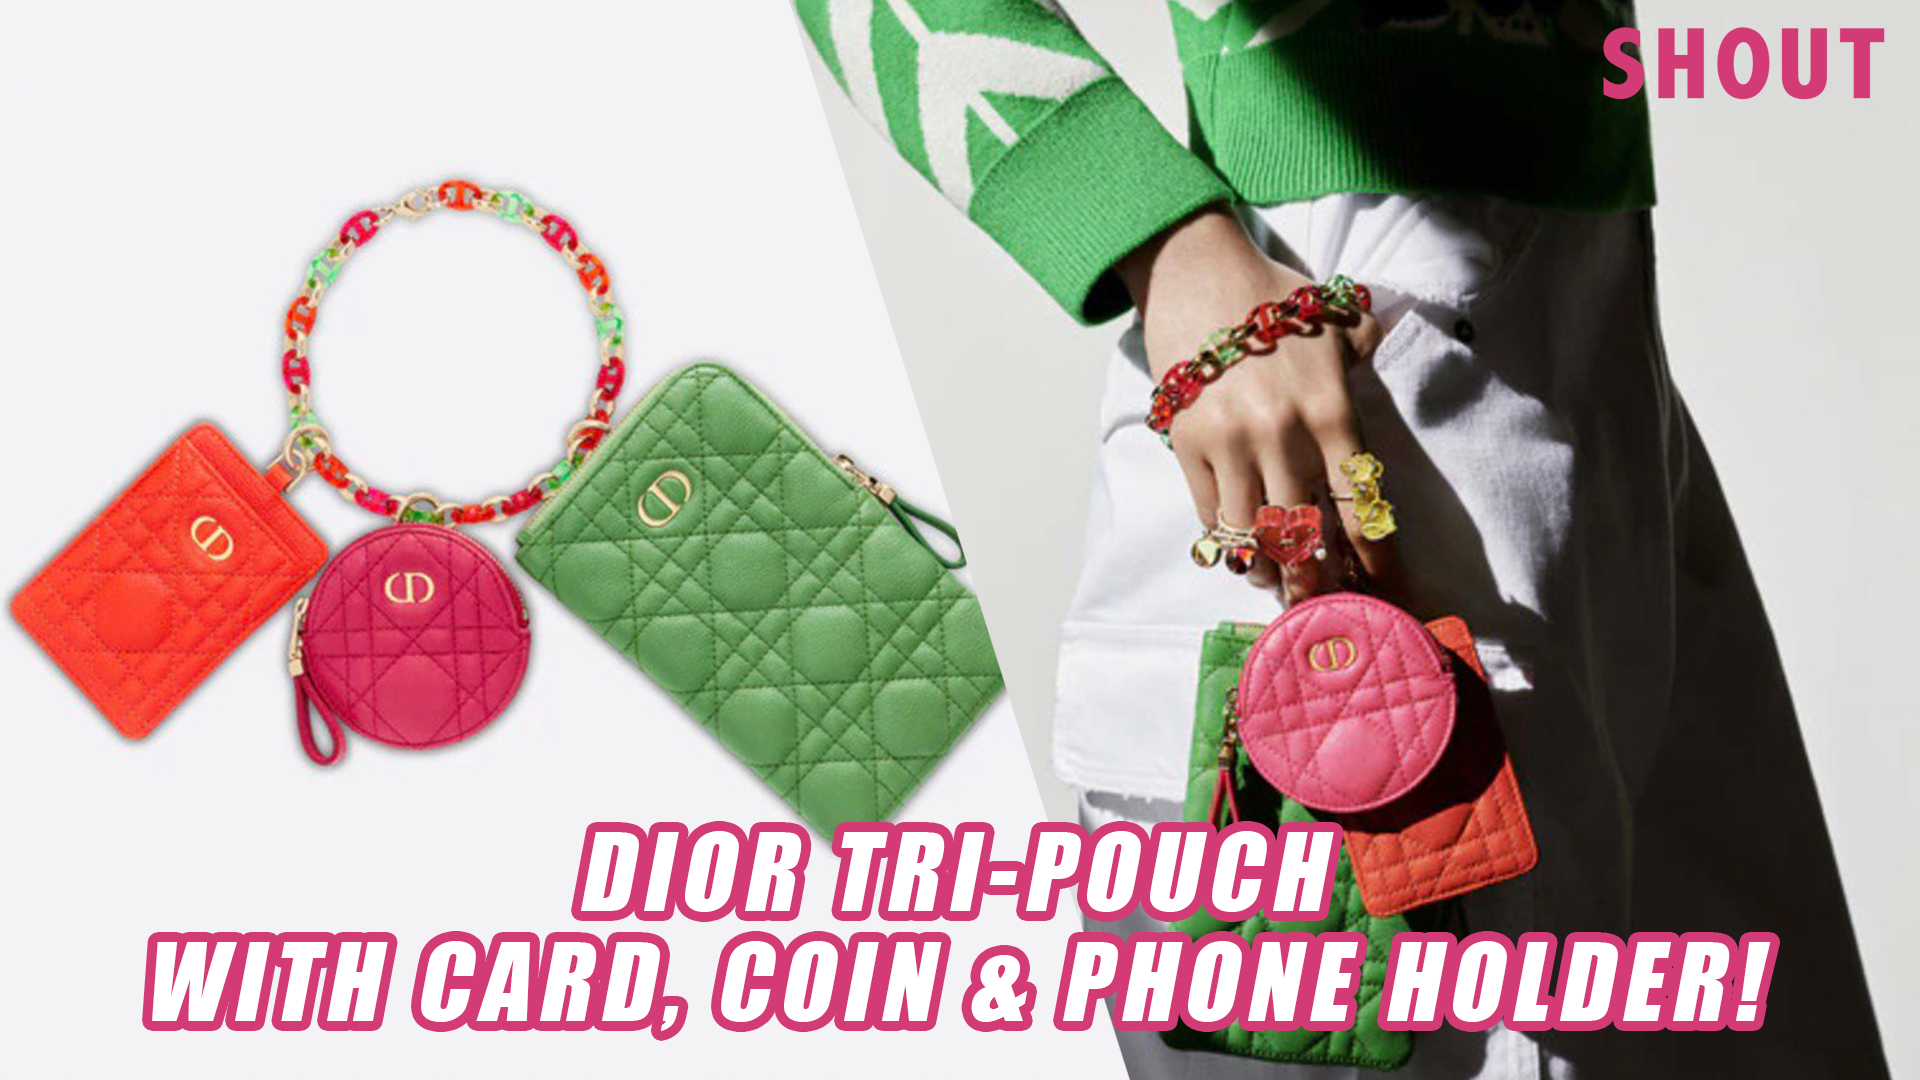 COLOURFUL THREE-WAY DIOR CARO CARD CASE, COIN POUCH & PHONE HOLDER ALL IN  ONE! - Shout